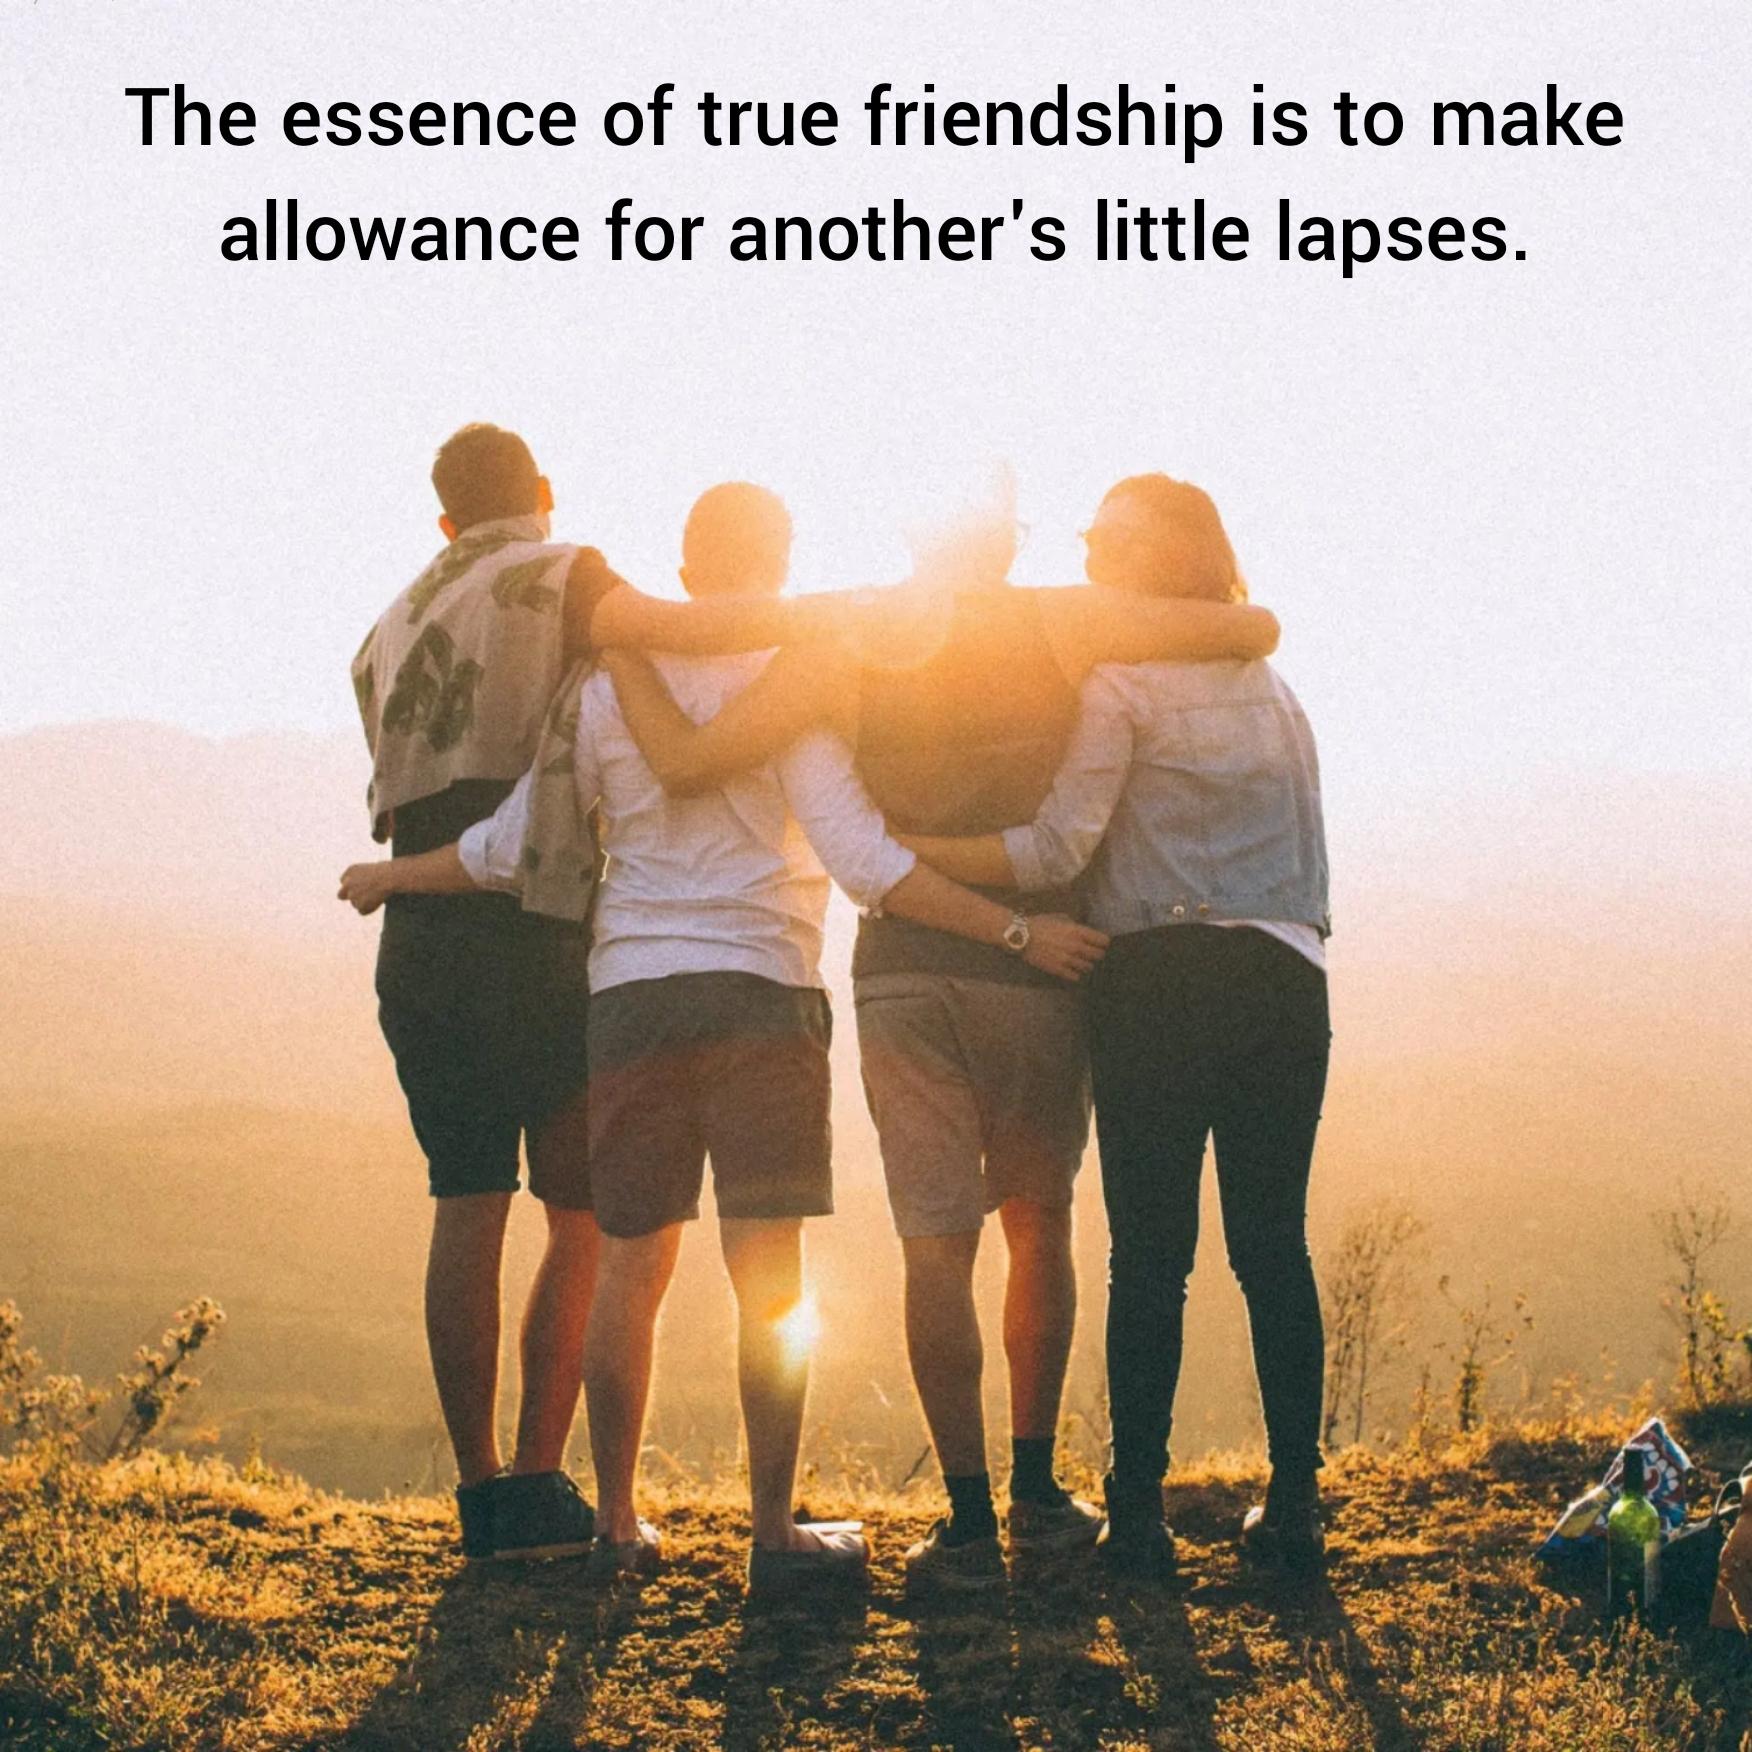 The essence of true friendship is to make allowance for another's little lapses